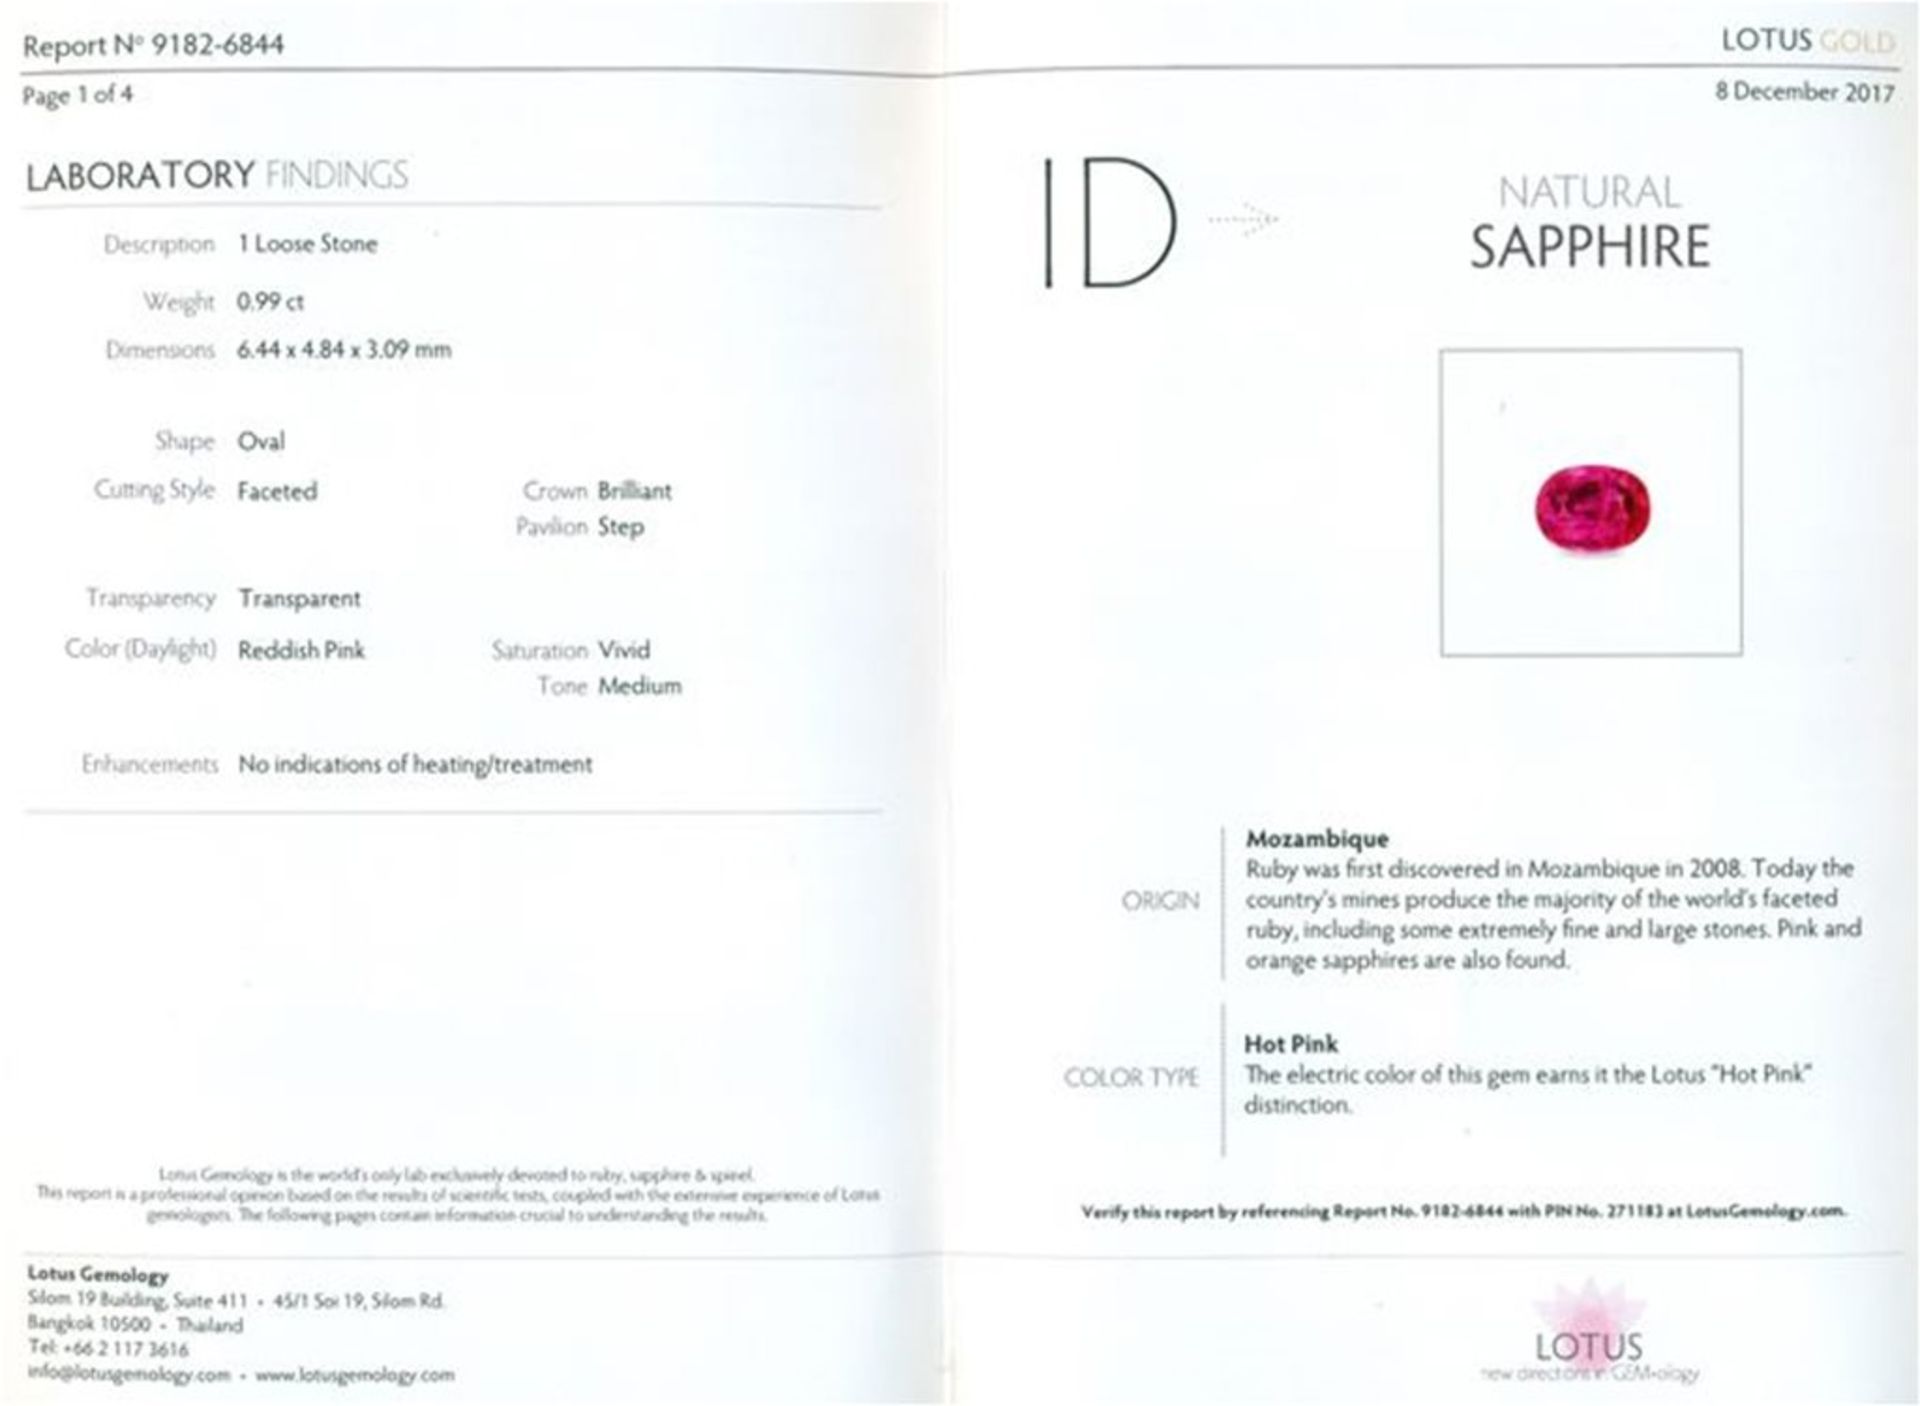 LOTUS Certified 0.99 ct. Hot Pink Sapphire MOZAMBIQUE - Image 2 of 10